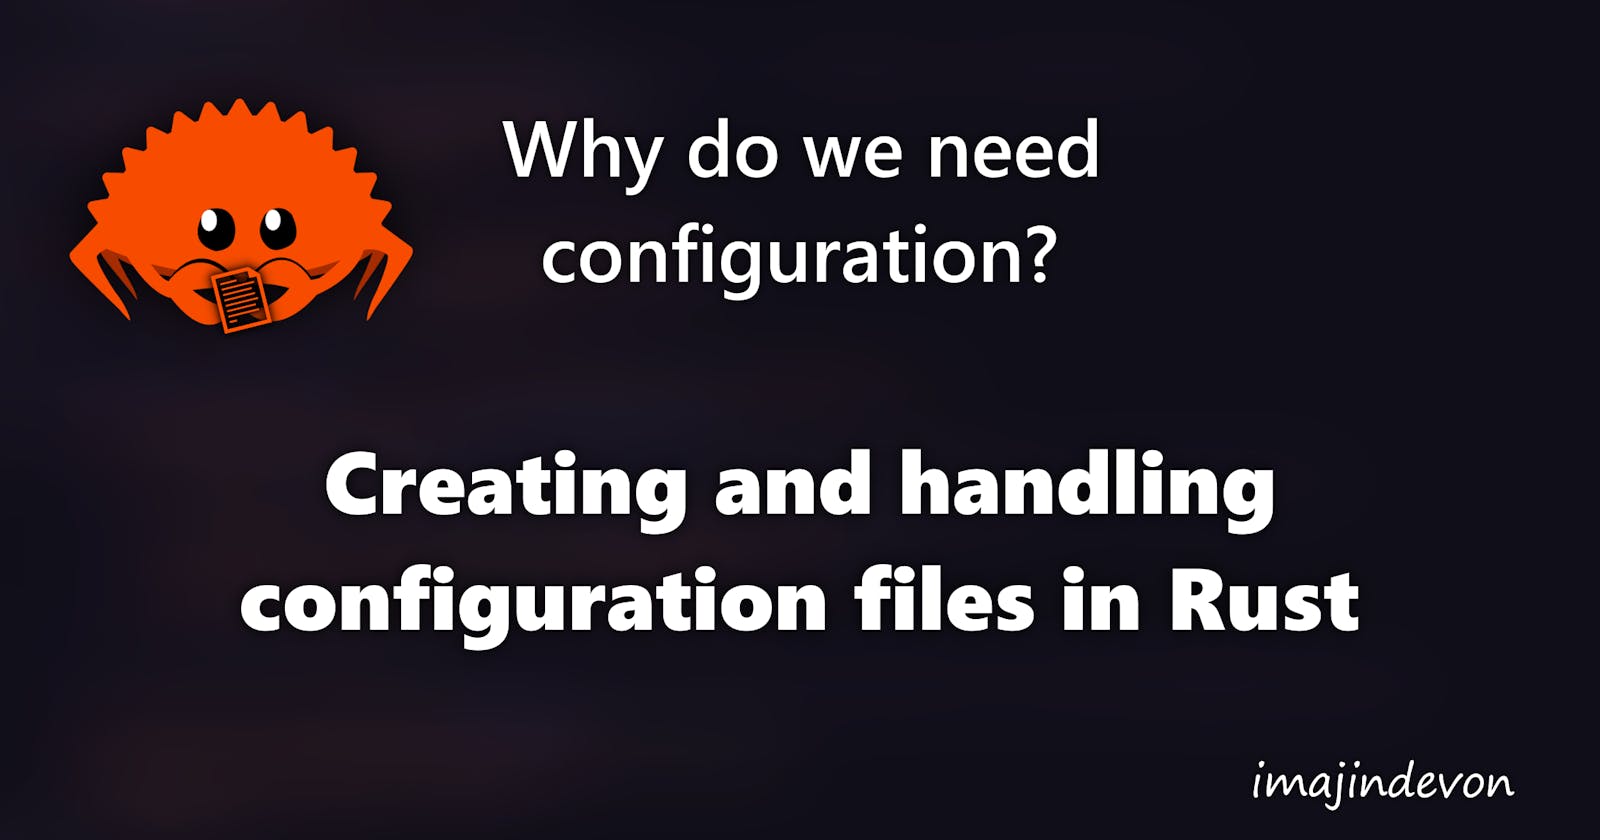 Why do we need configuration? Creating and handling configuration files in Rust